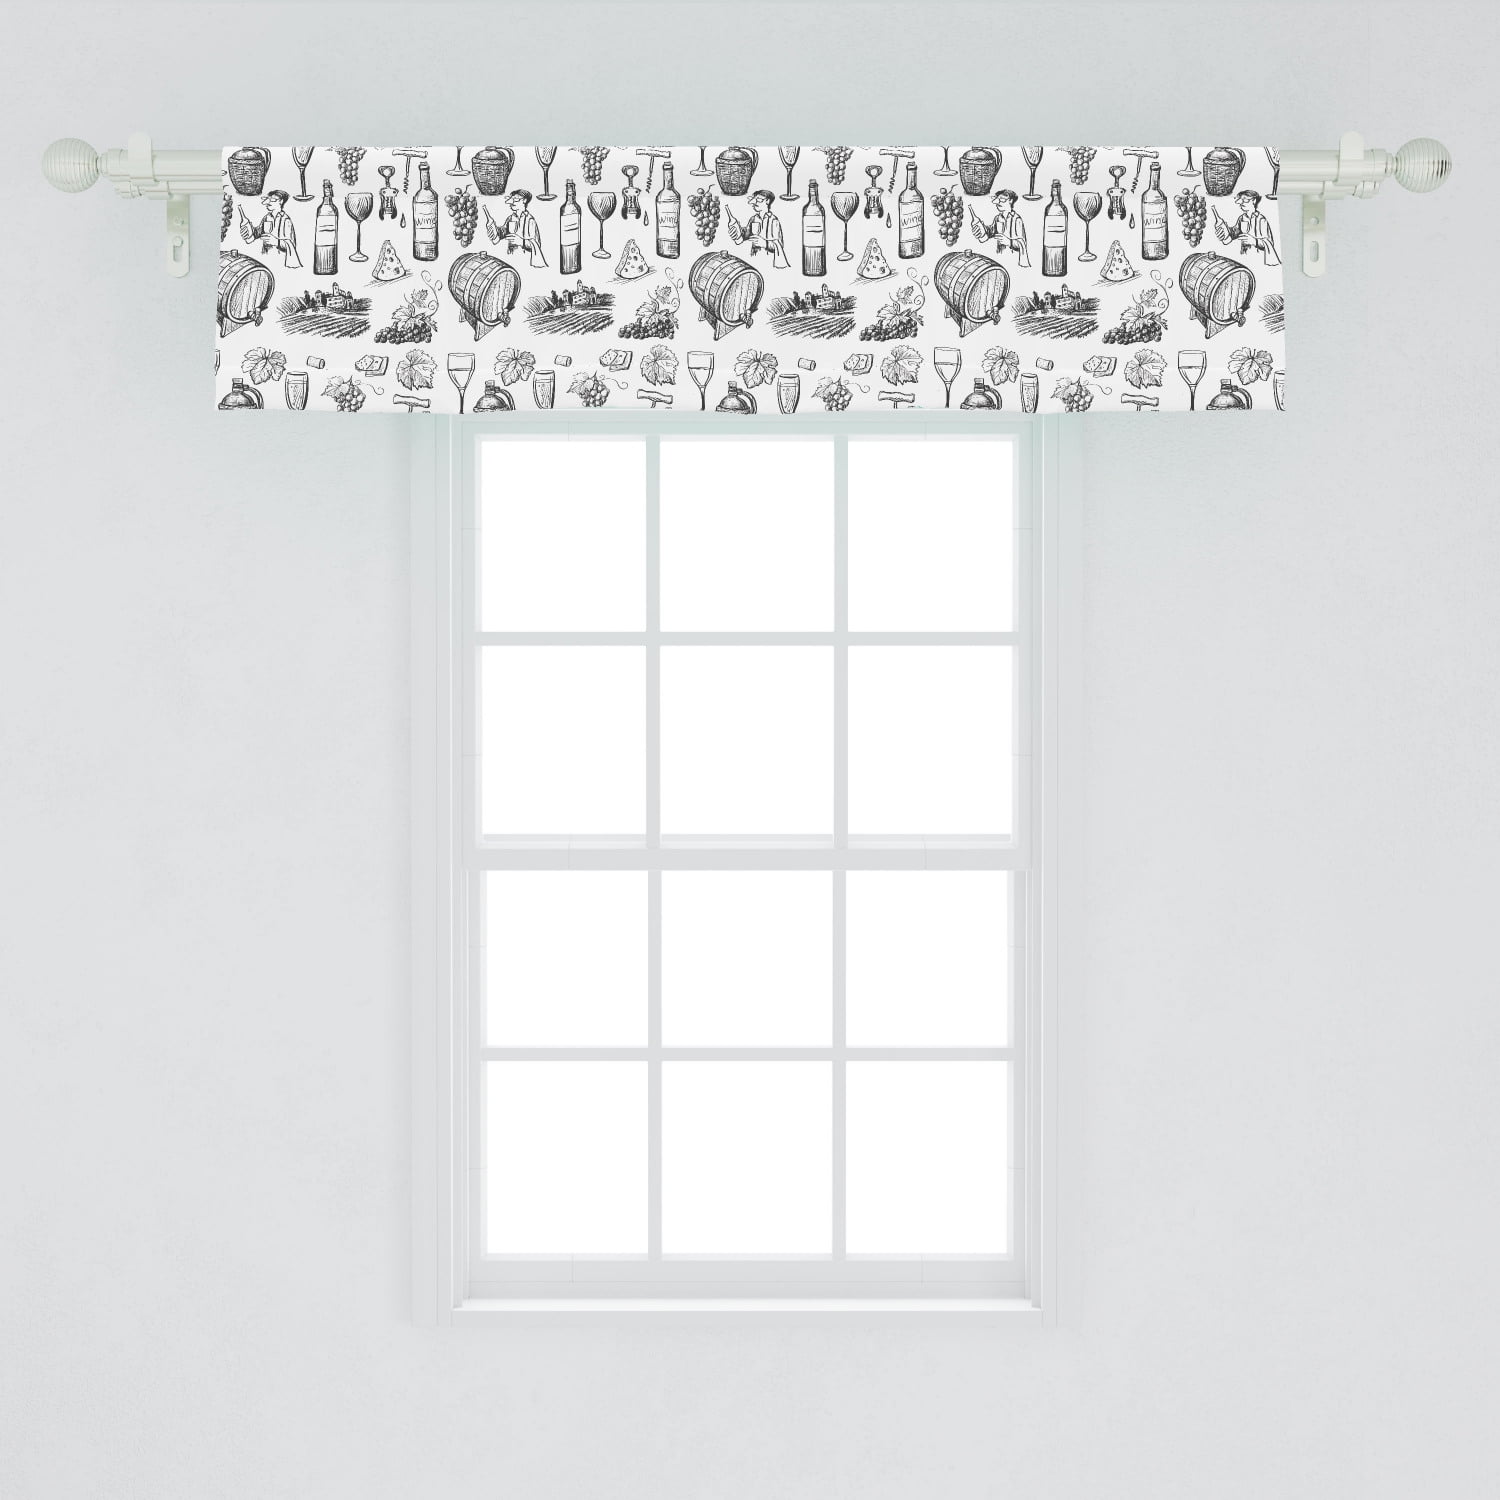 NEW Wine Glasses & Bottles & Grapes Valance Curtain Window Topper 